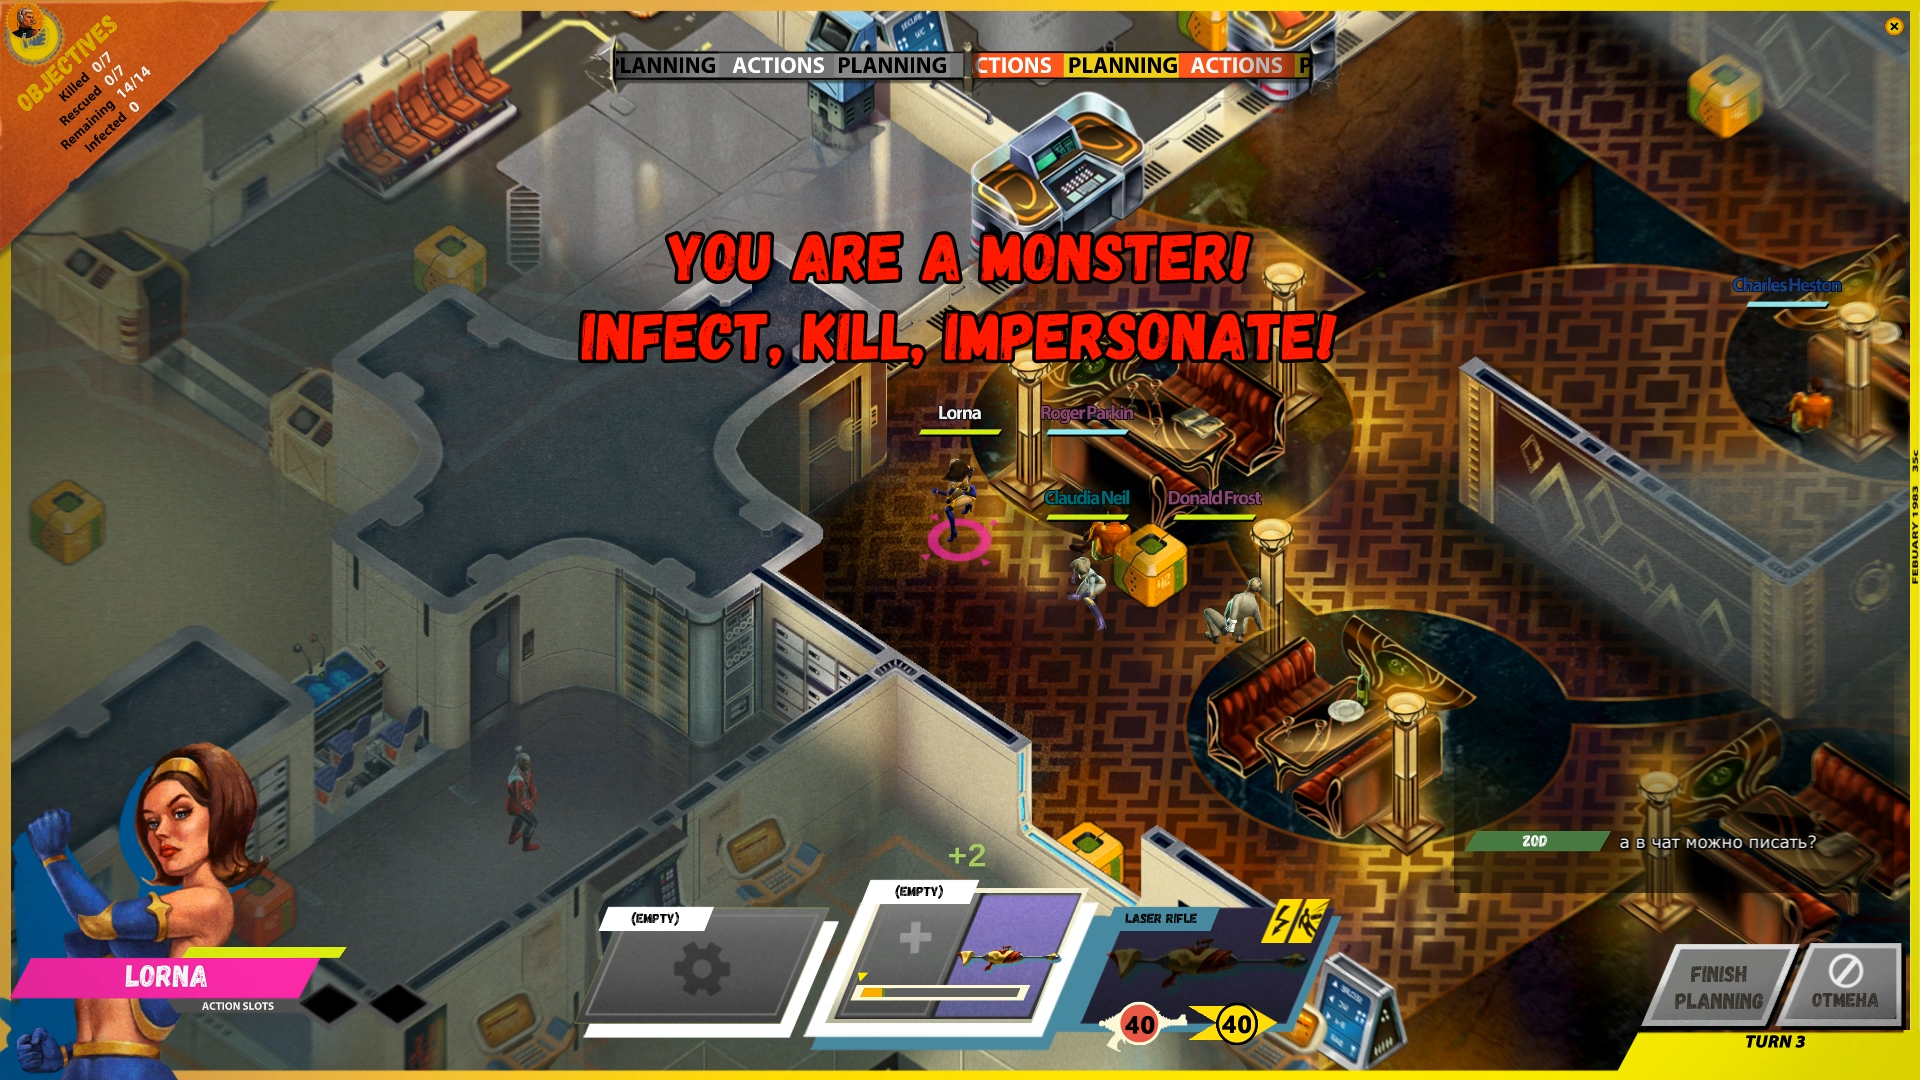 download free i am not a monster first contact